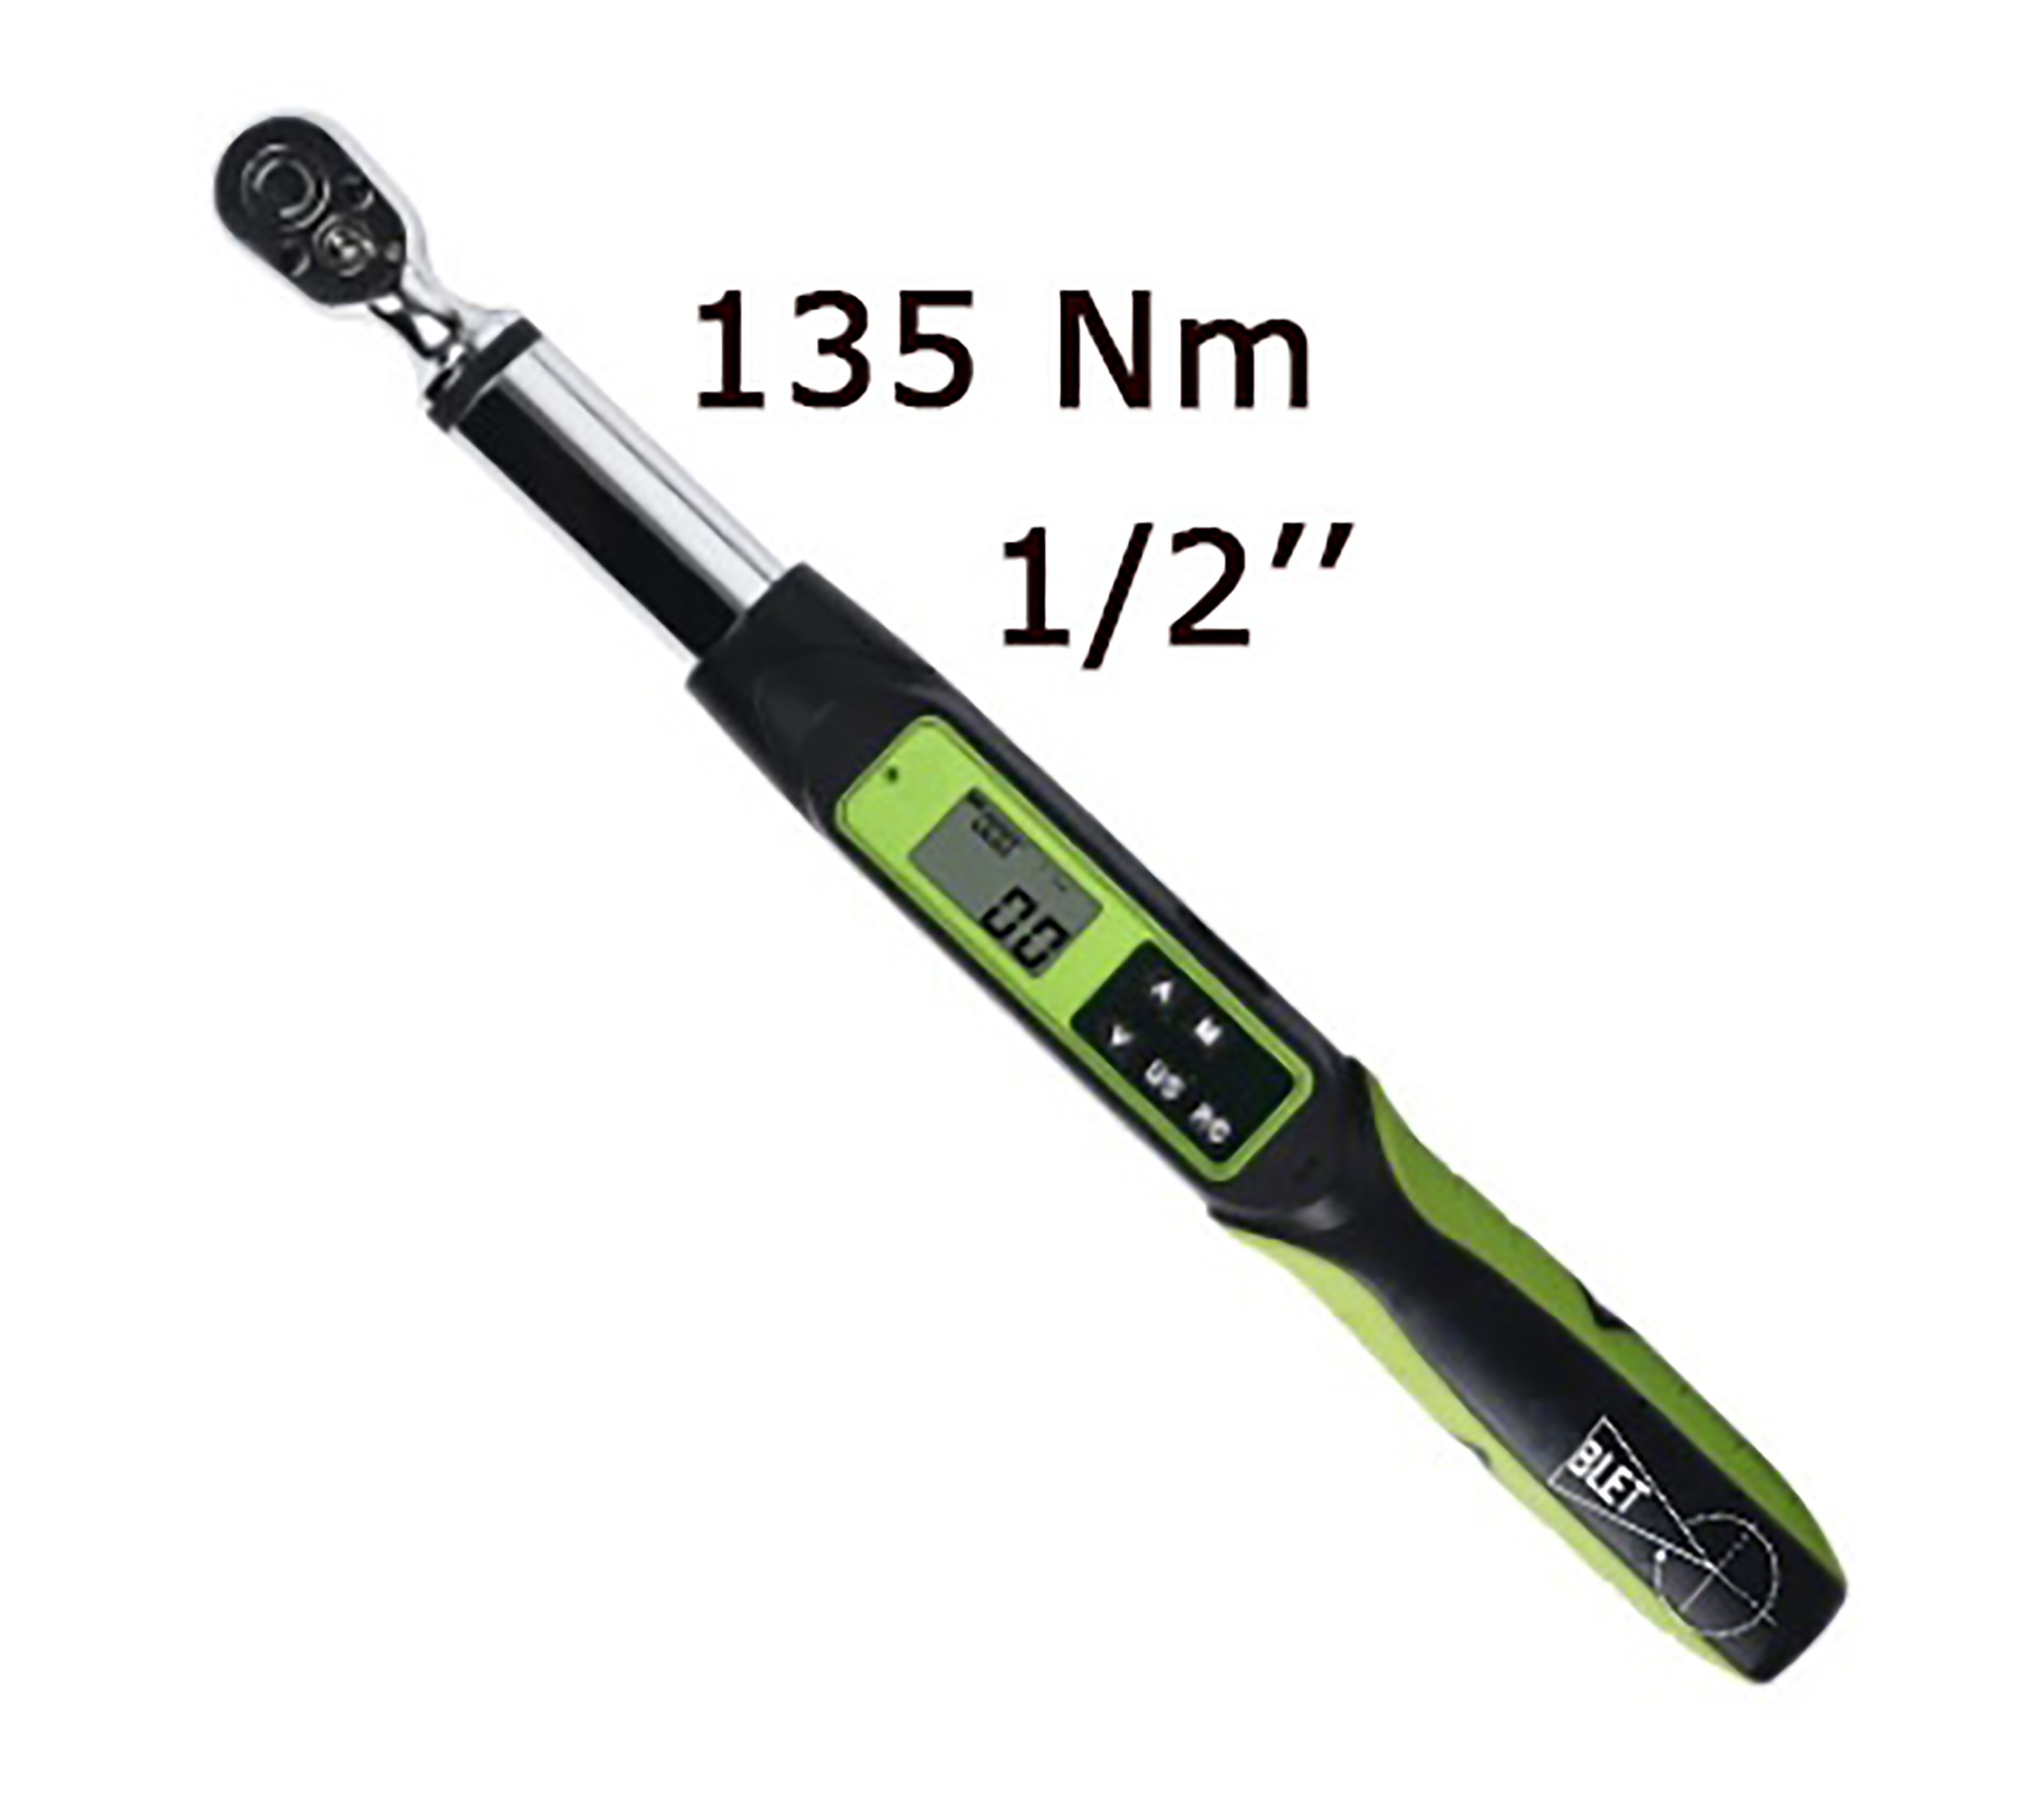 DIGITAL TORQUE ANGLE WRENCH WITH COMMUNICATION 135 Nm READING 0,1 Nm SIZE 1/2" BLET<br>Ref : CLET5-CDB13512